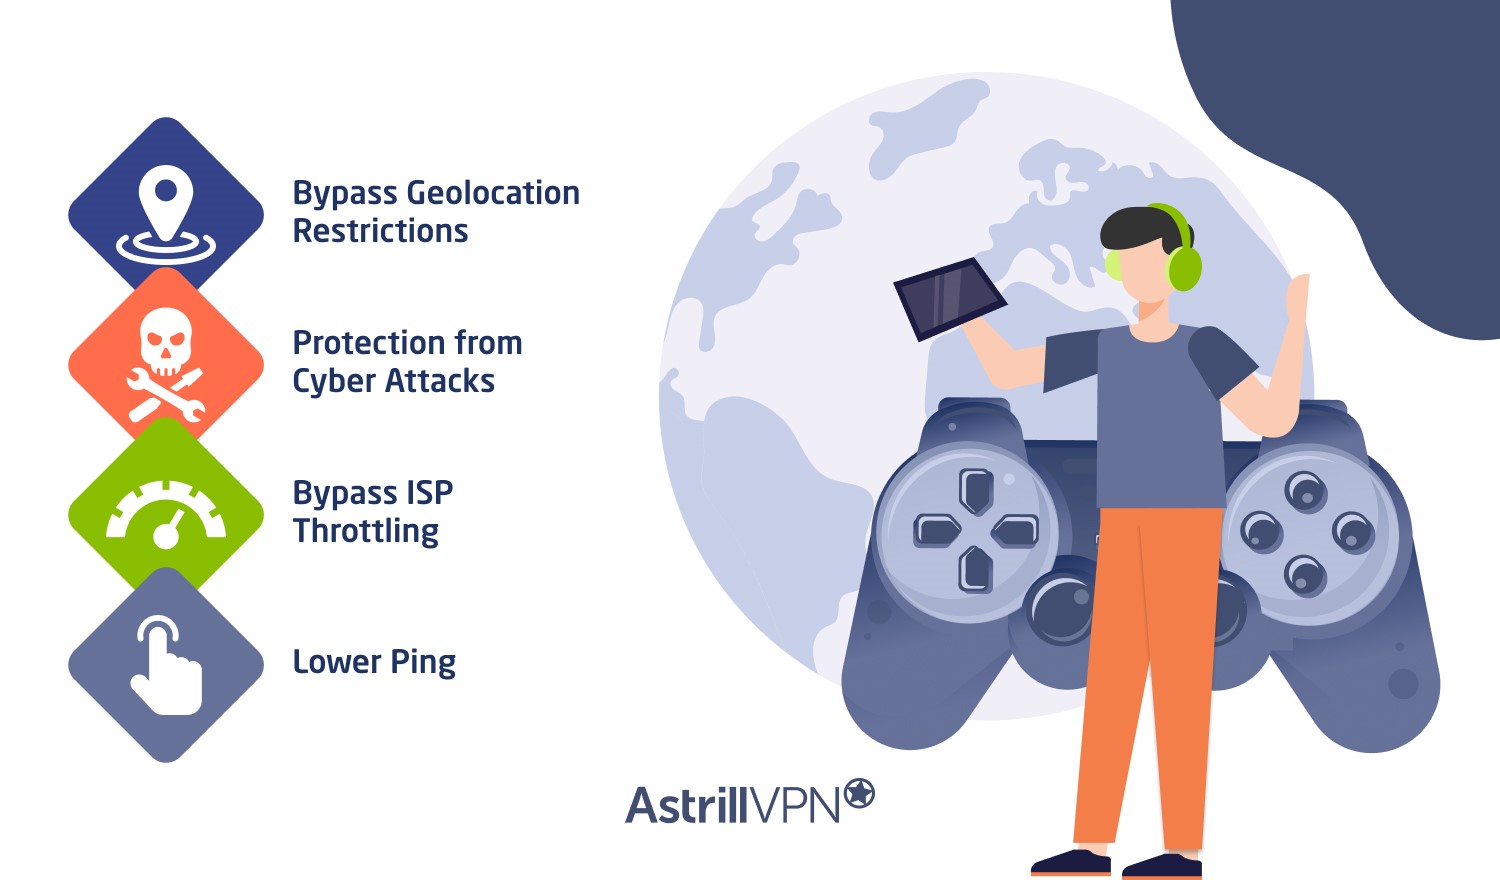 What Are The Benefits of Using AstrillVPN For Online Gaming